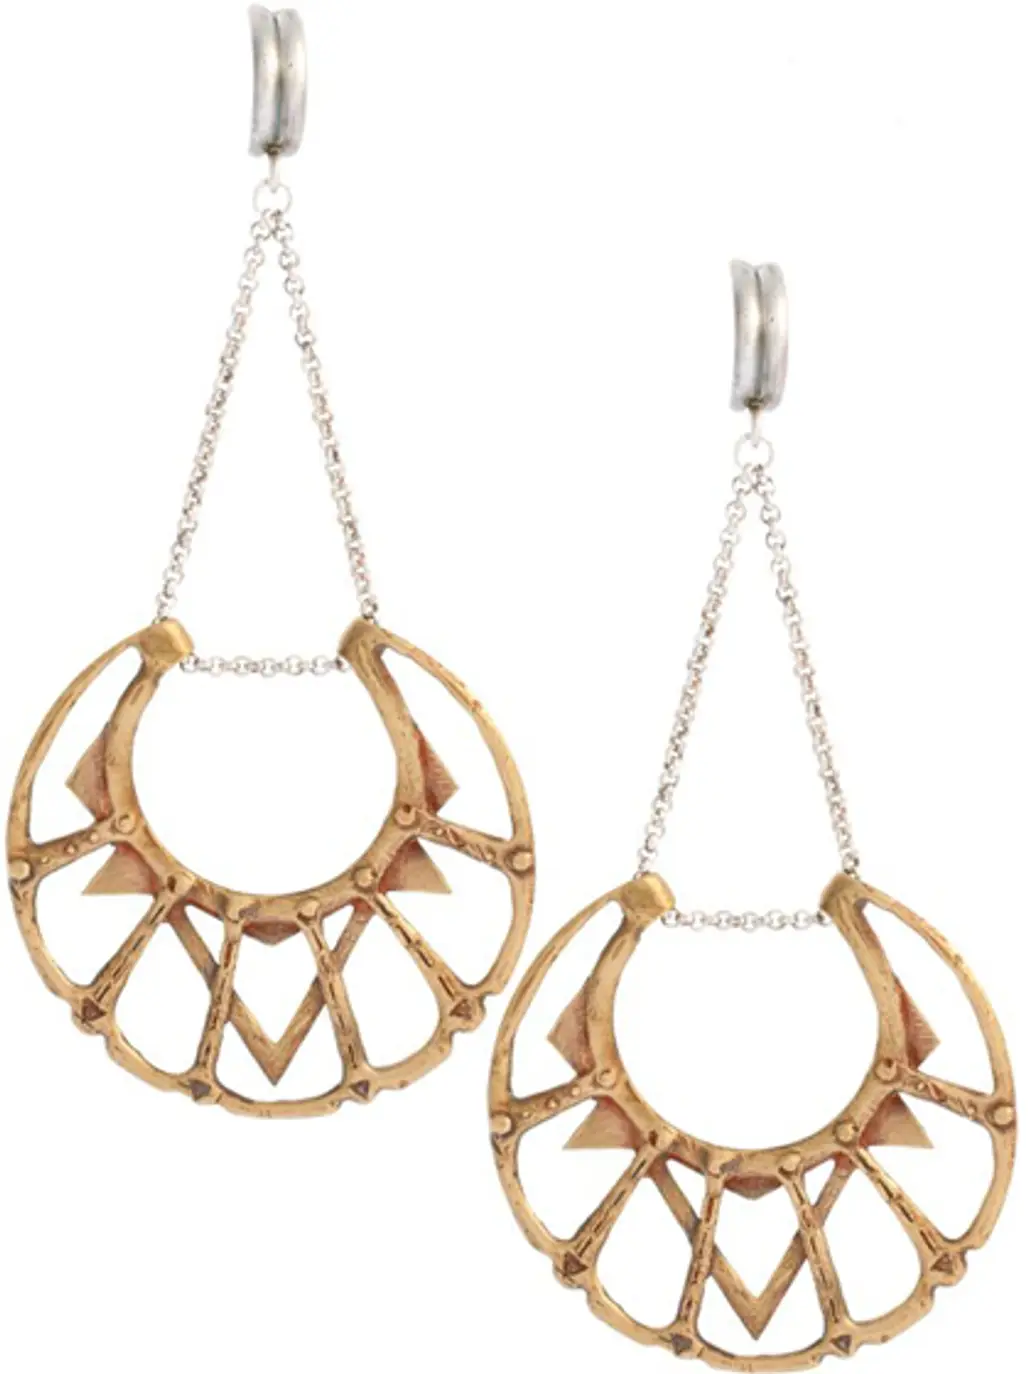 Big Bang Silver and Brass Chandelier Earrings